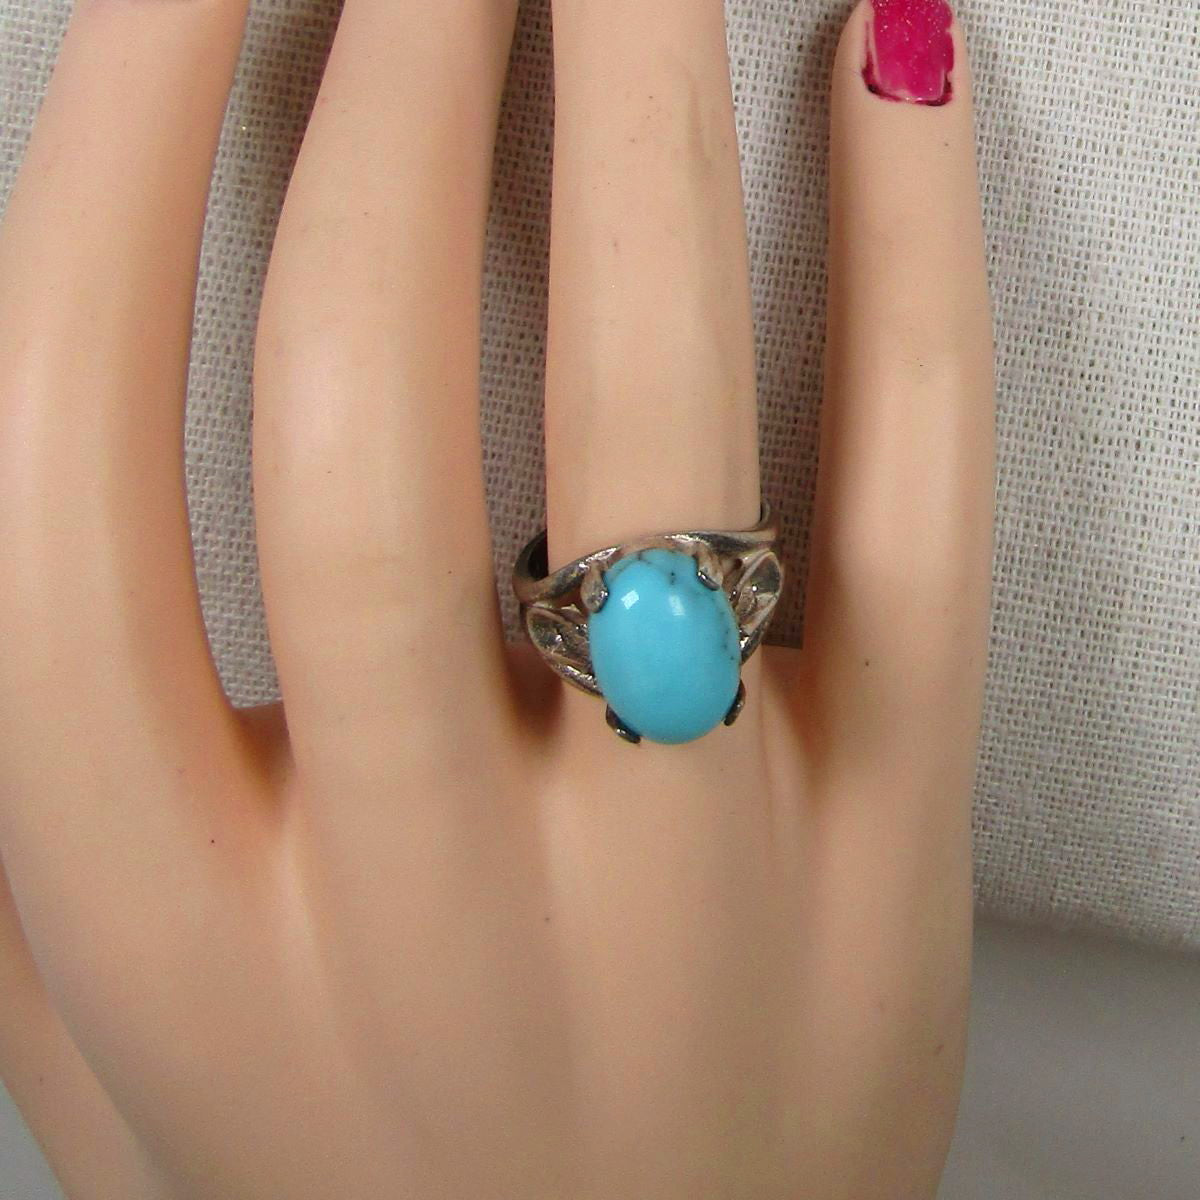 Affordable Turquoise Woman's Ring Size 7 VP's Jewelry